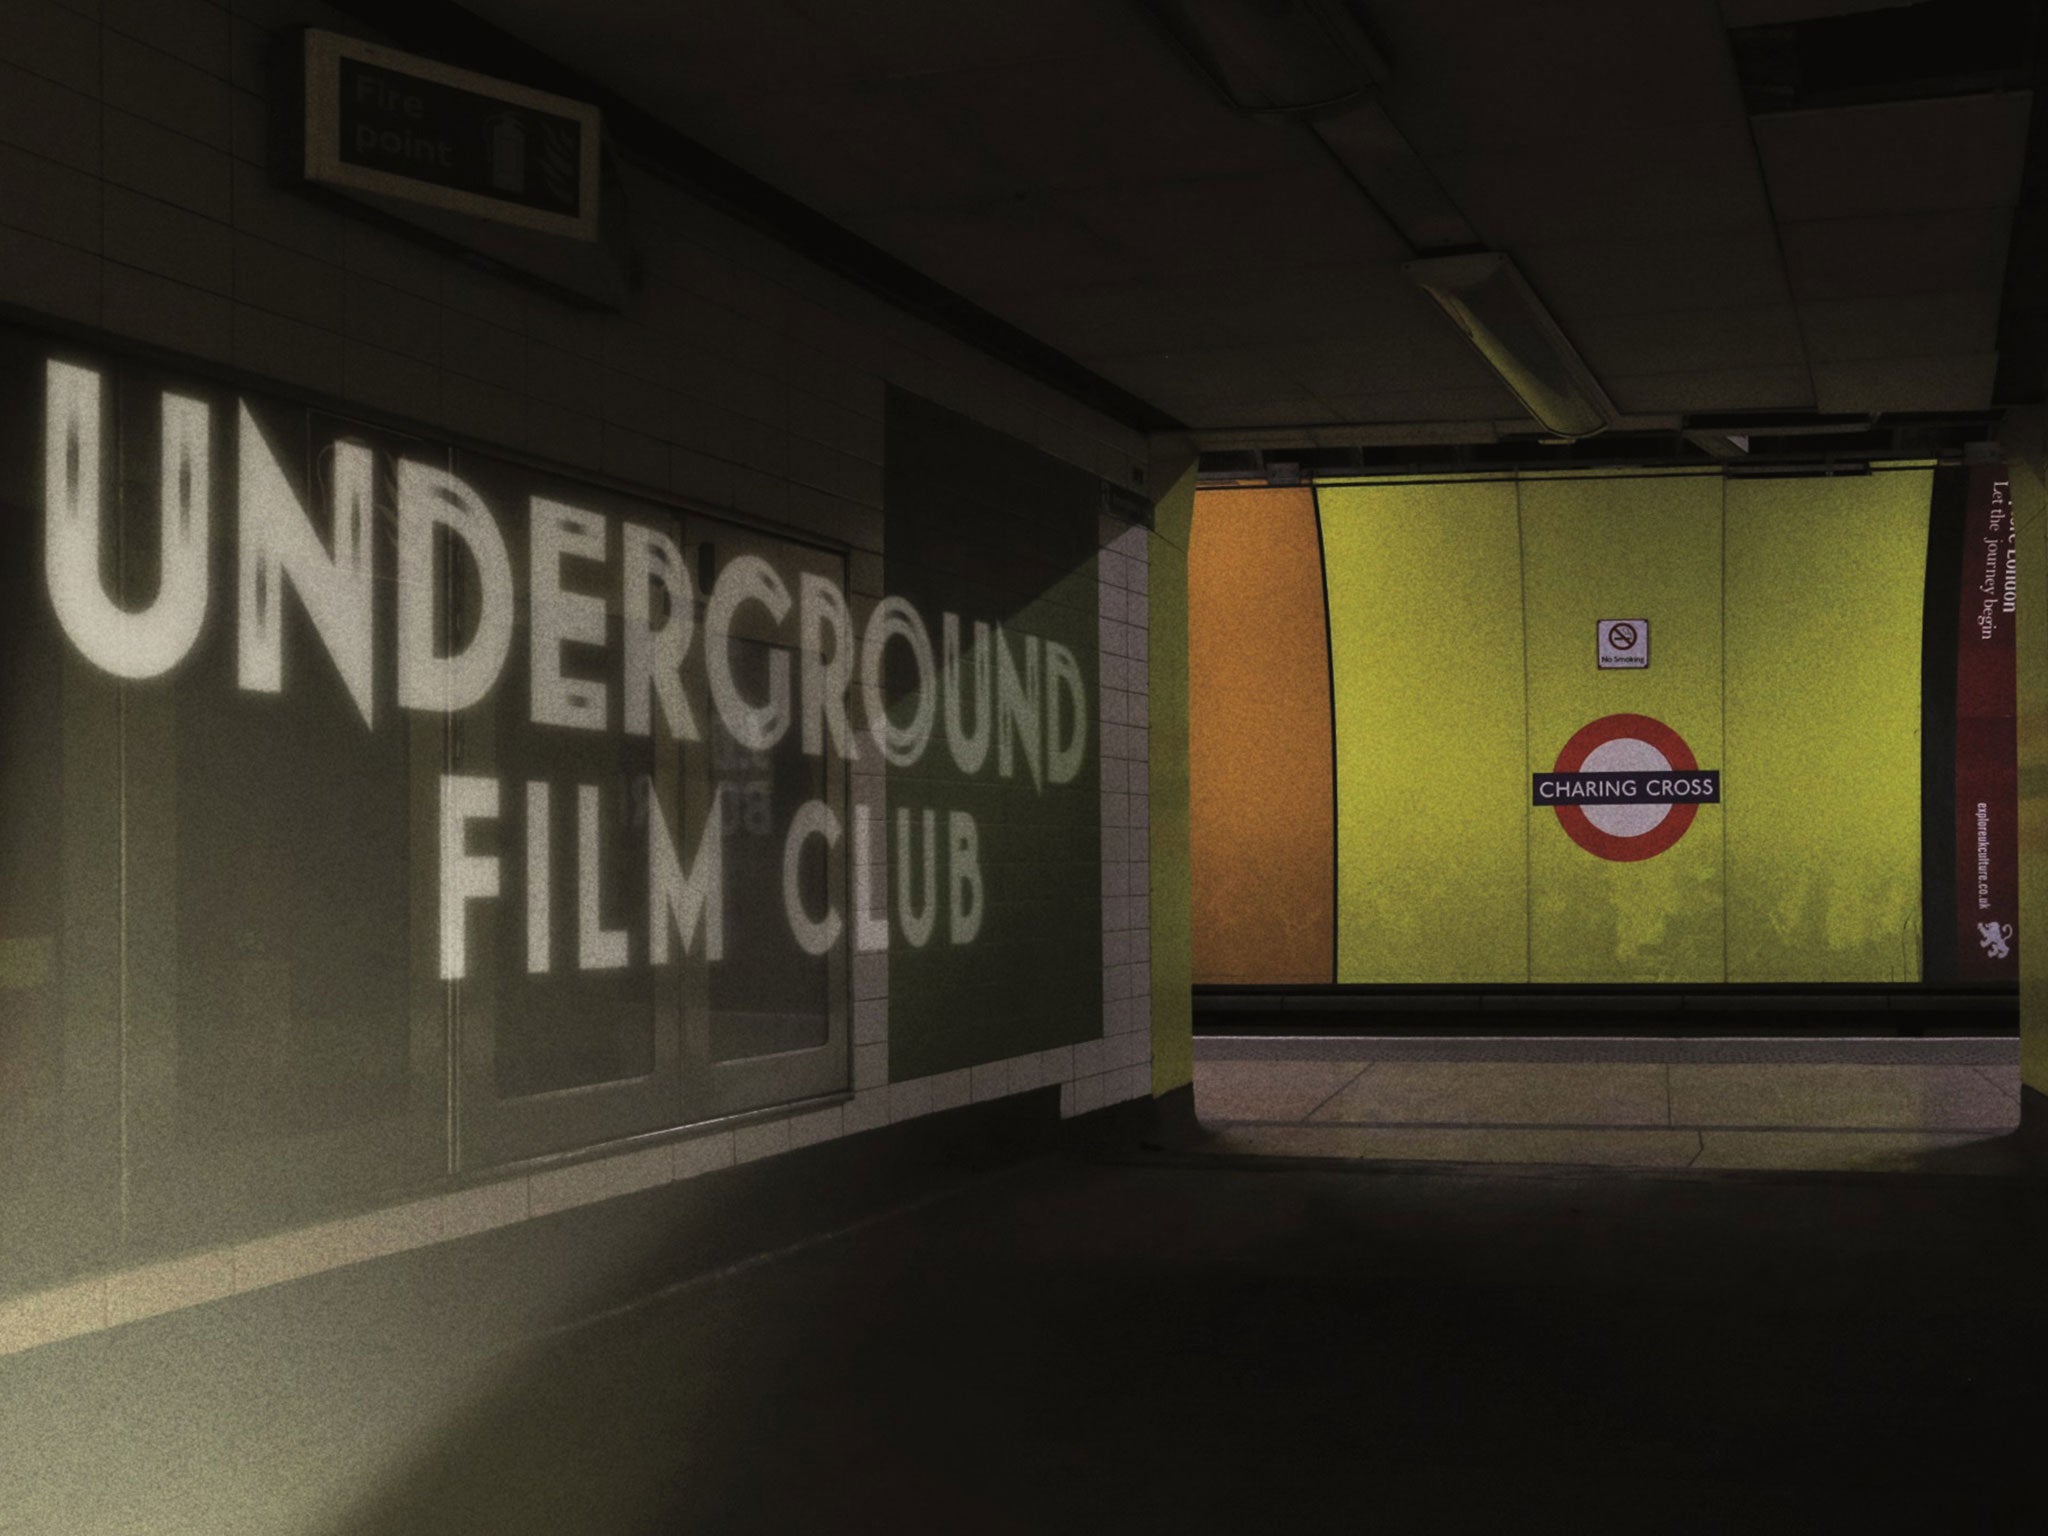 Charing Cross station to come alive with pop-up cinema experience